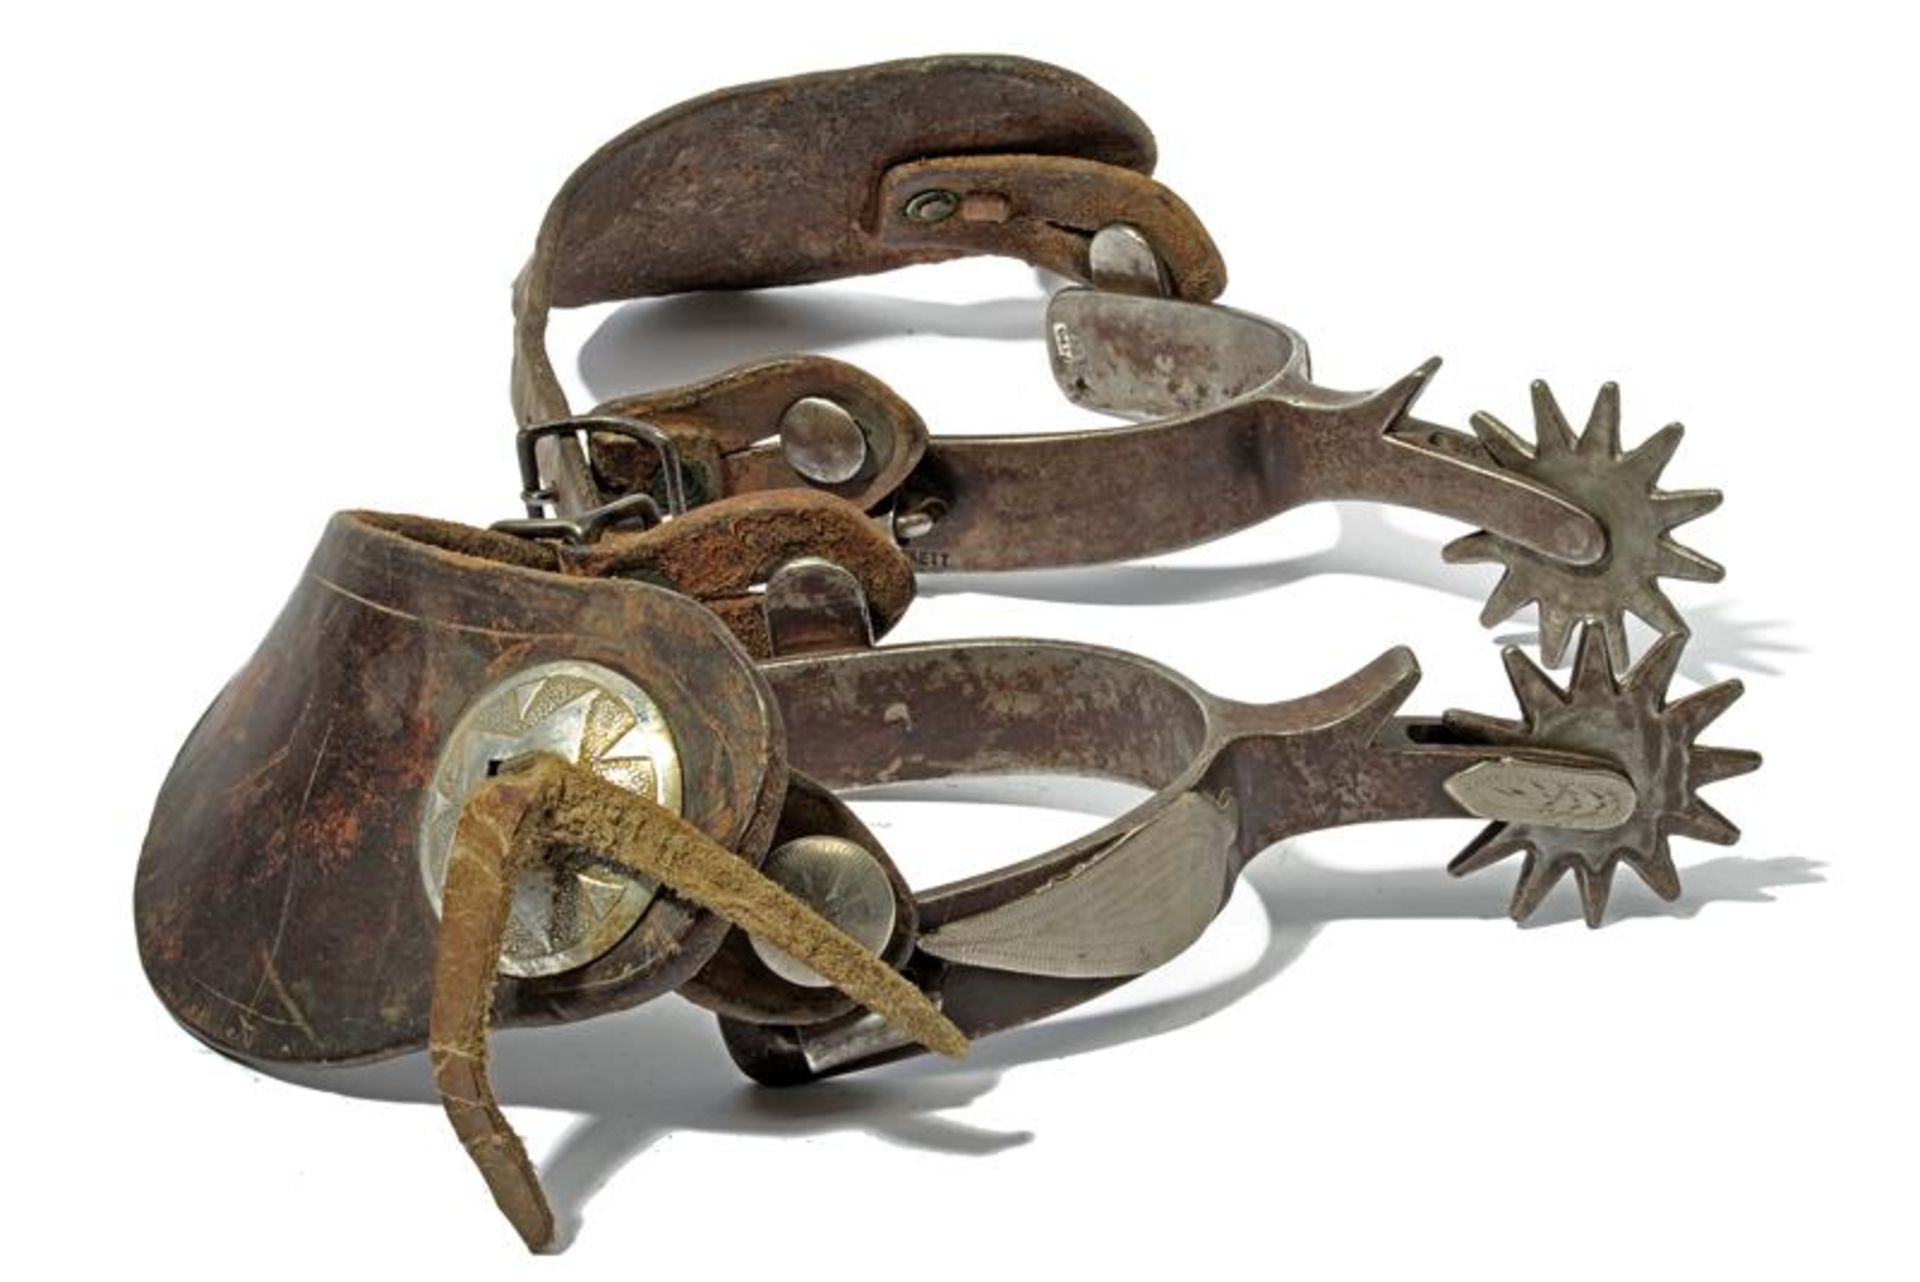 A pair of spurs